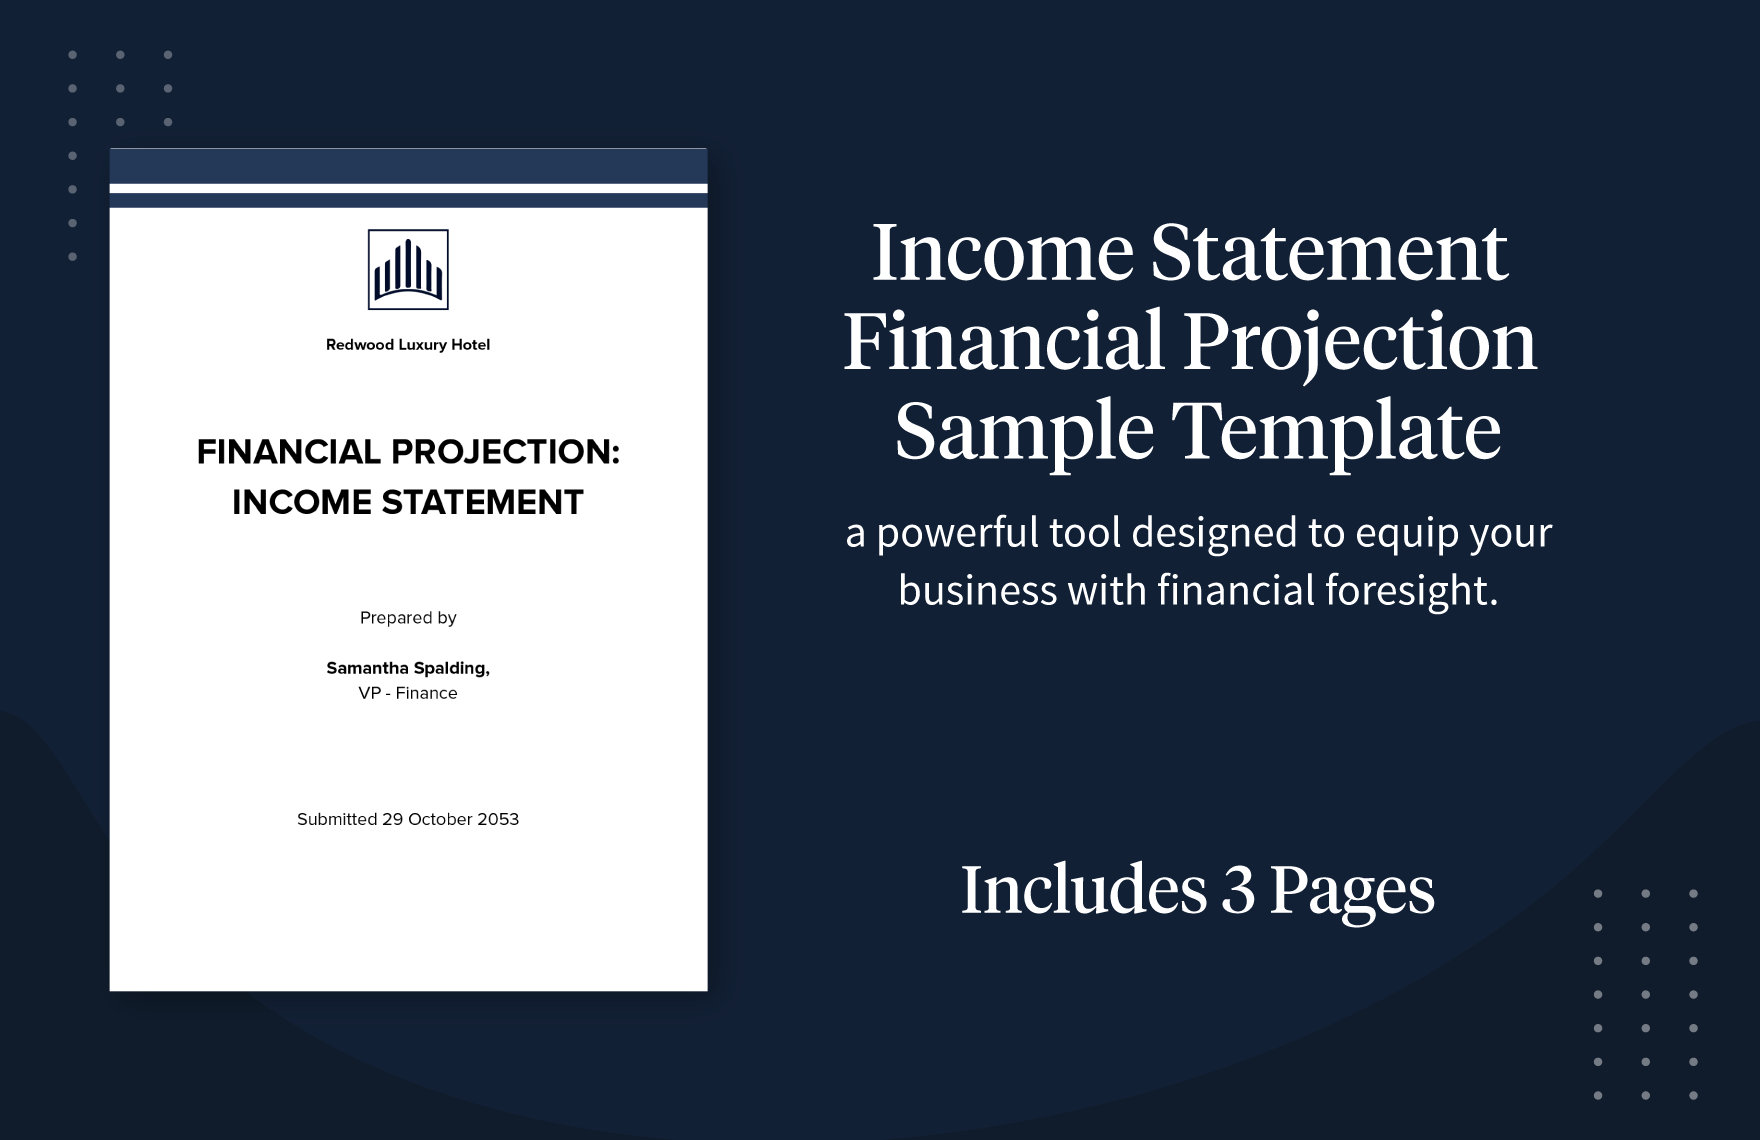 Income Statement Financial Projection Sample Template